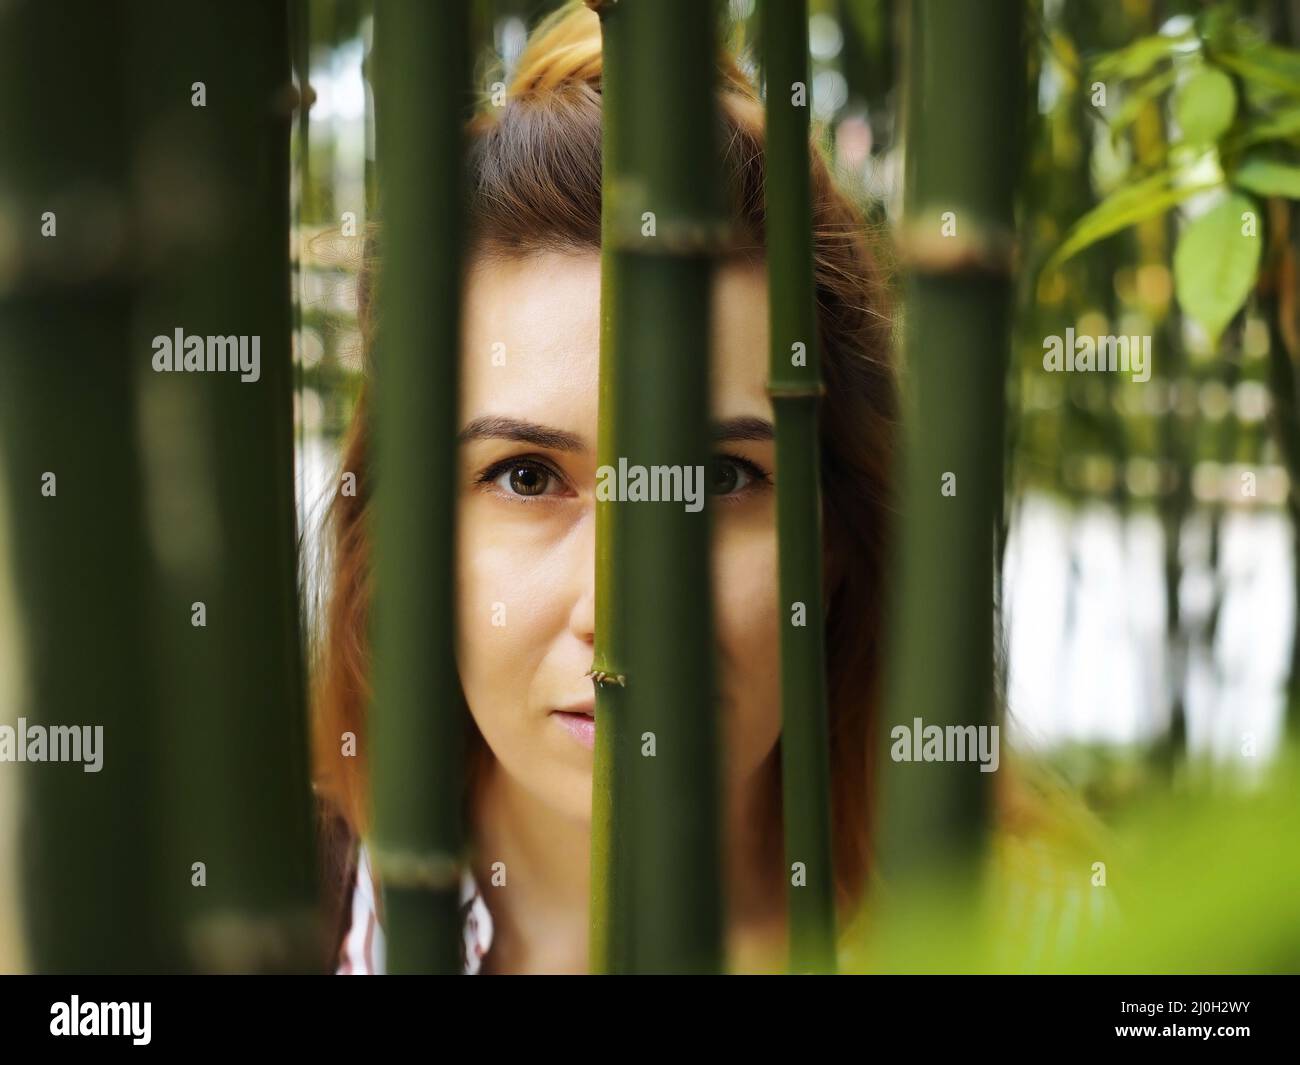 The browneyed girl looks through the green bamboo trees. Closeup photo Stock Photo